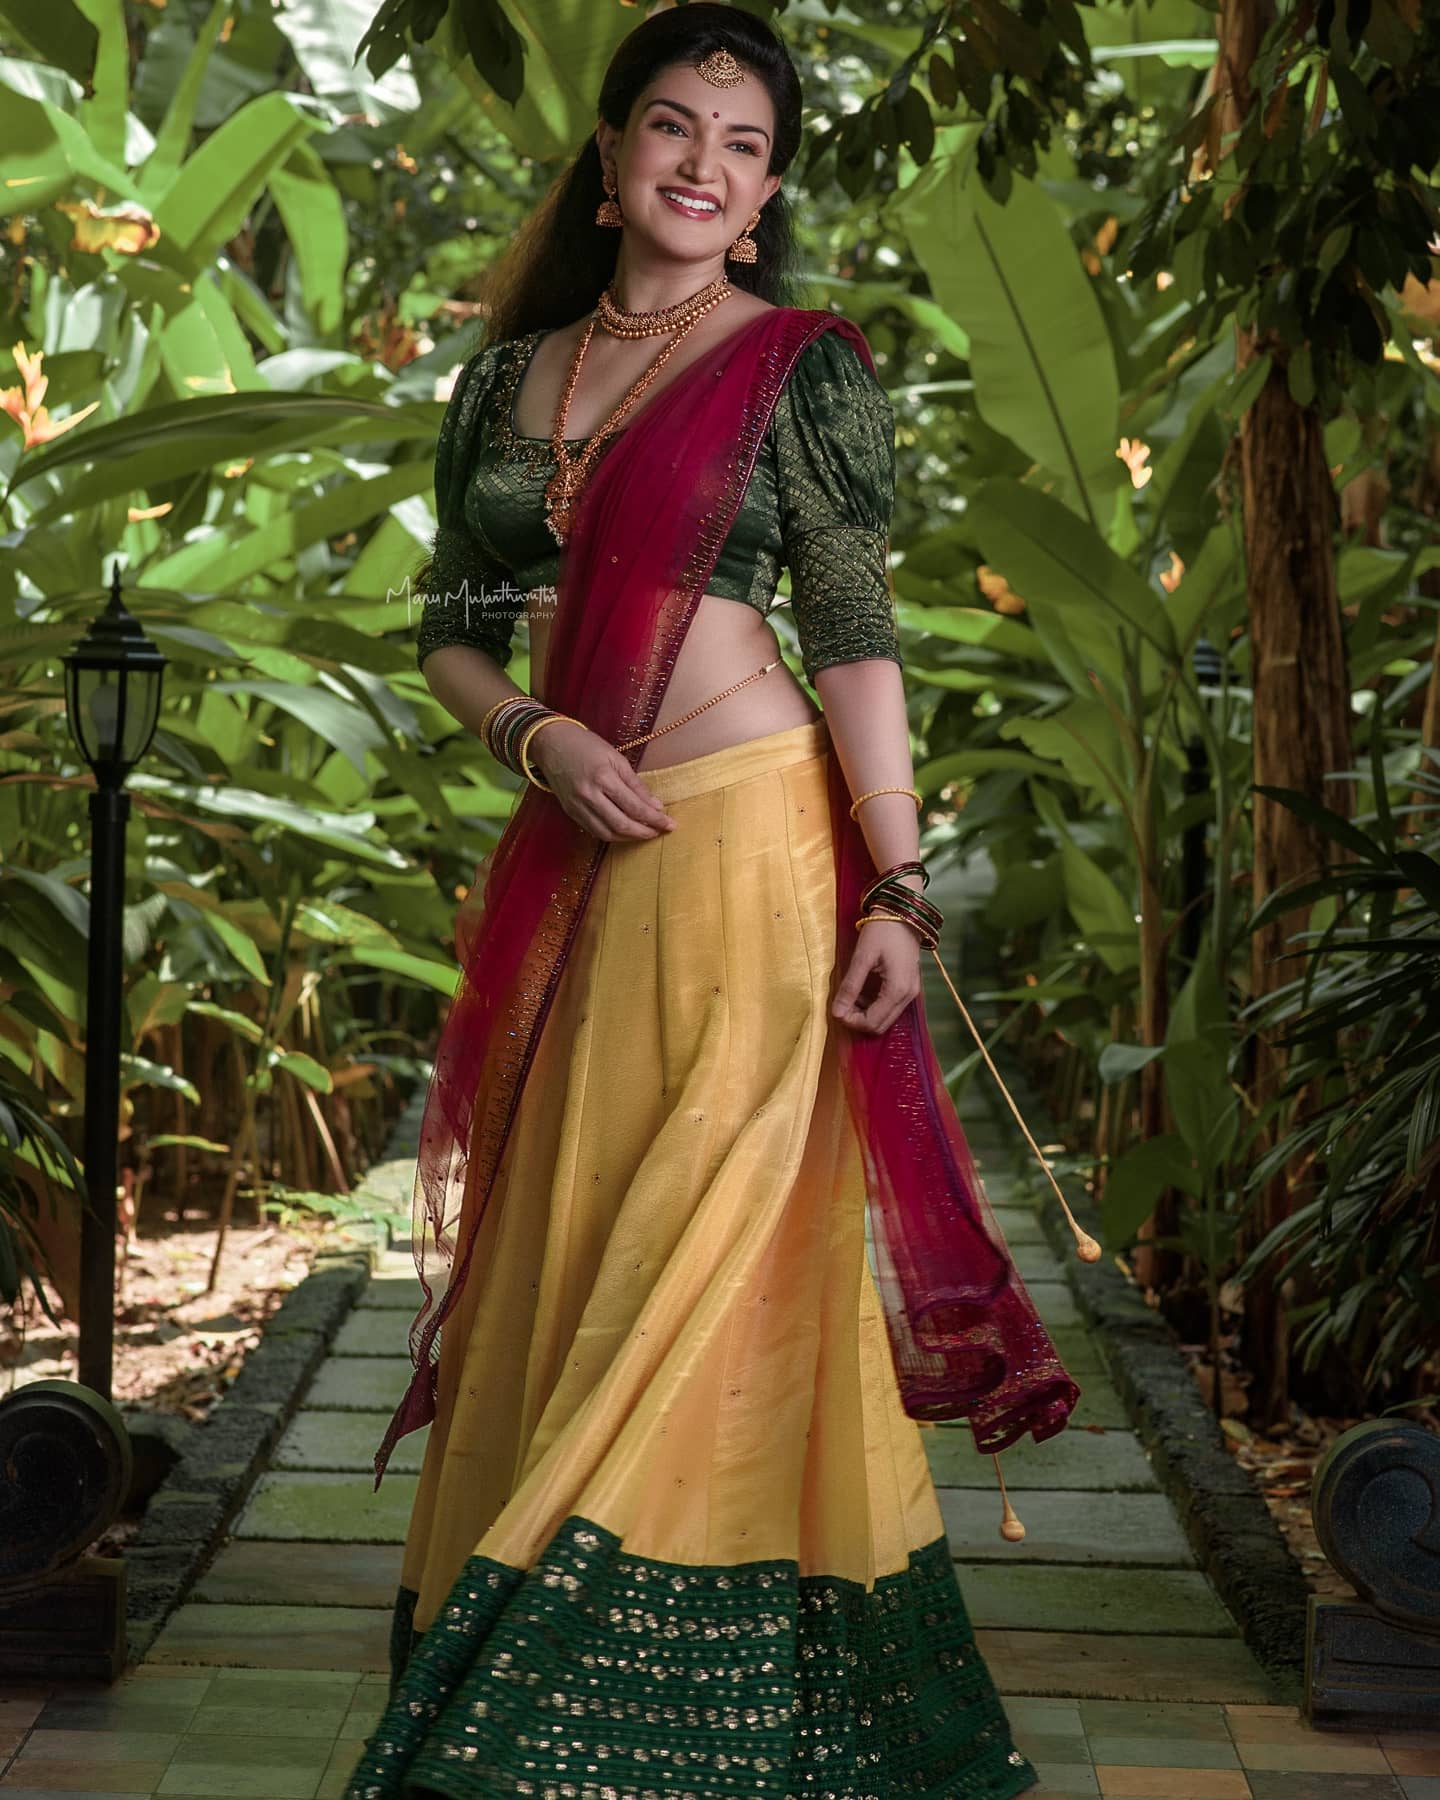 Honey Rose Look Pretty Amazing in a Yellow & Green Lehenga Set Paired With Pink Net Dupatta